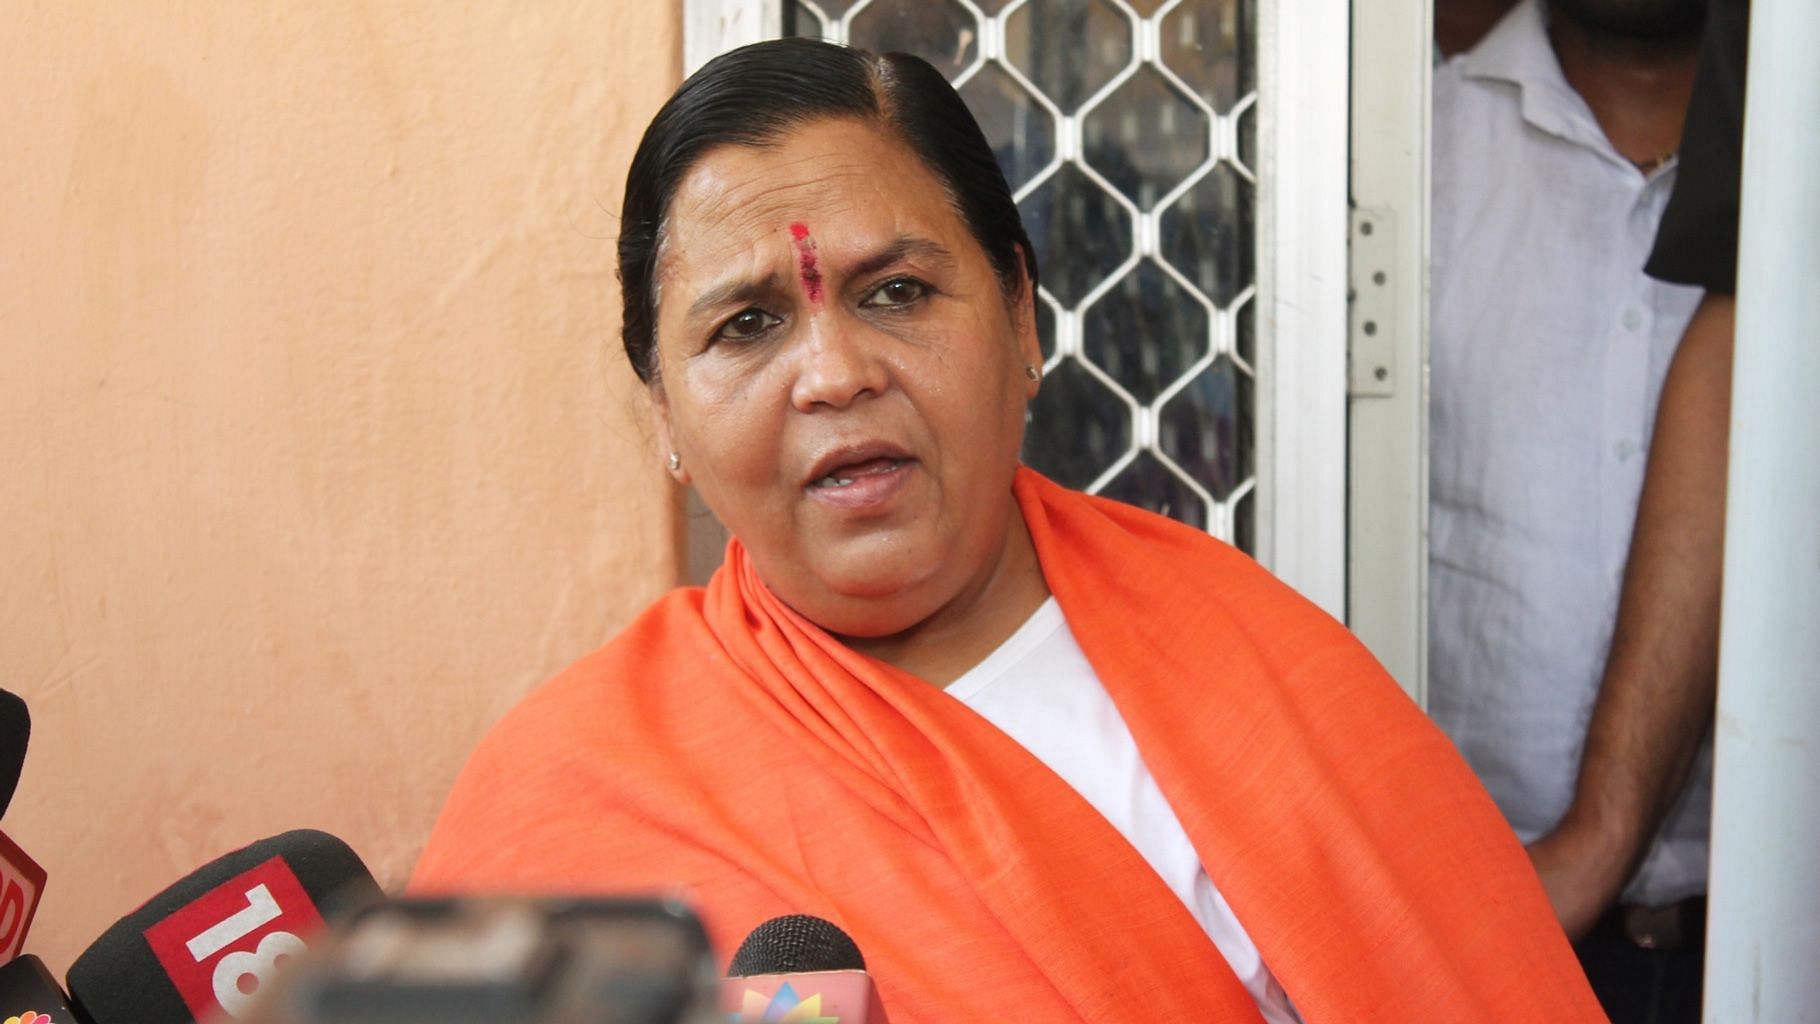 BJP leader Uma Bharti stated that she would not be contesting the 2019 Lok Sabha elections.&nbsp;